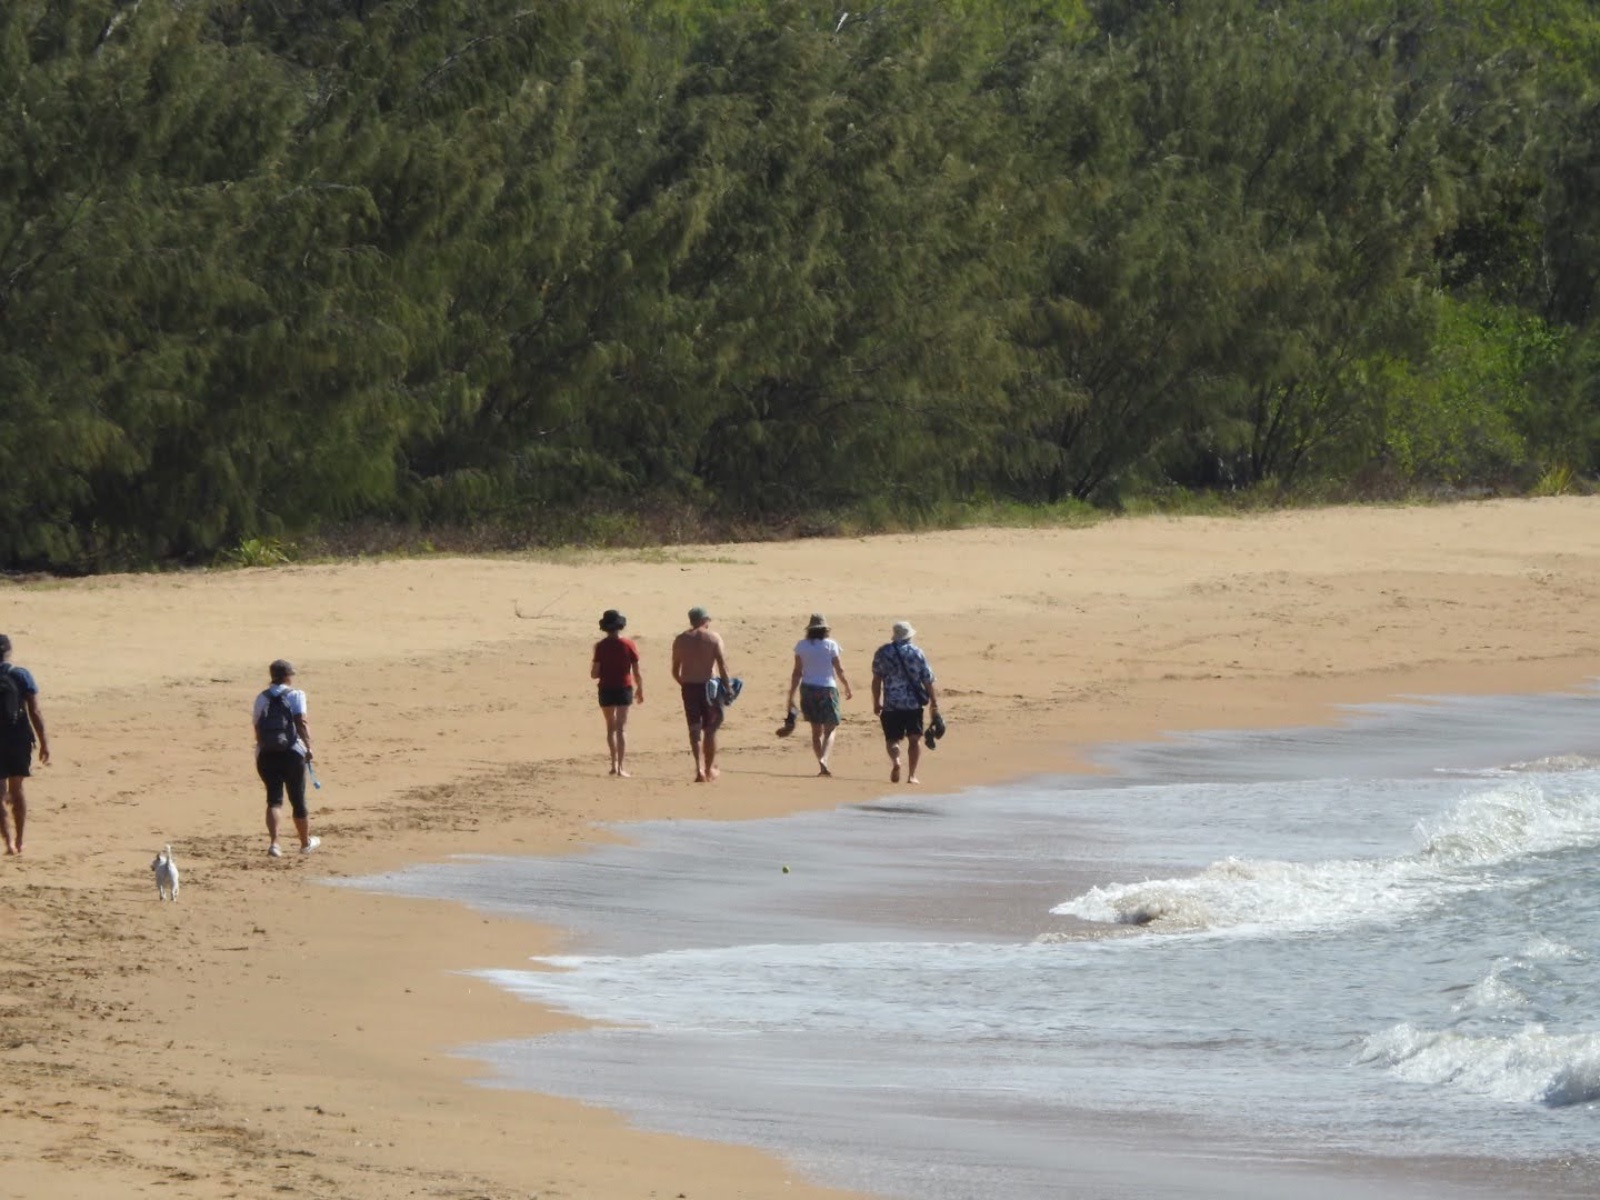 Students walking on the beach.